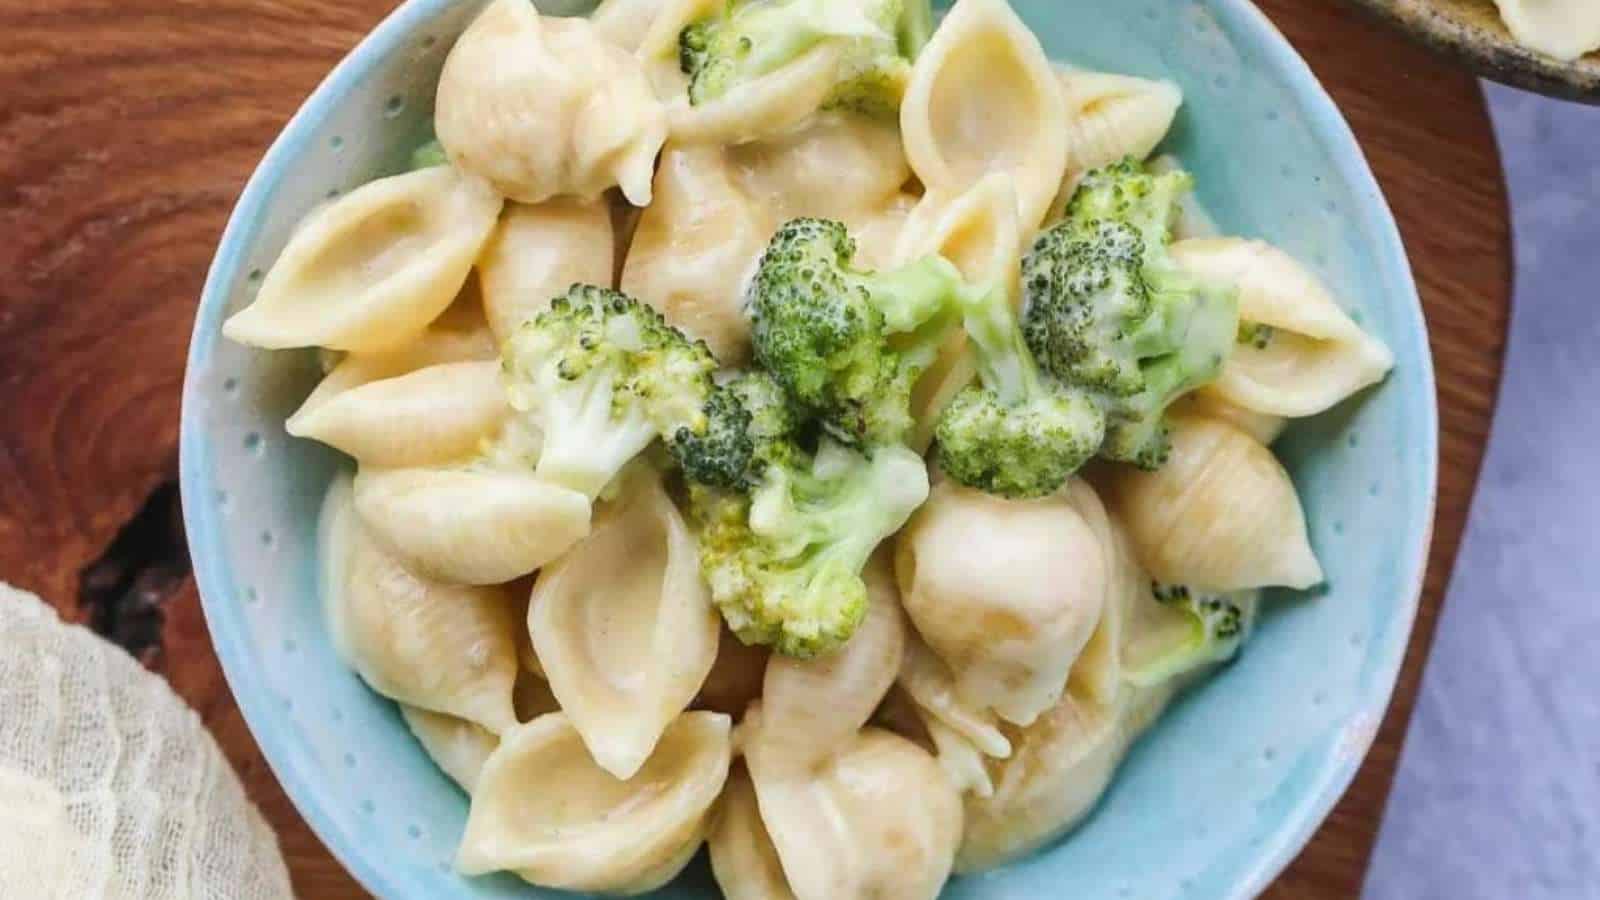 A bowl of pasta with broccoli and cheese.